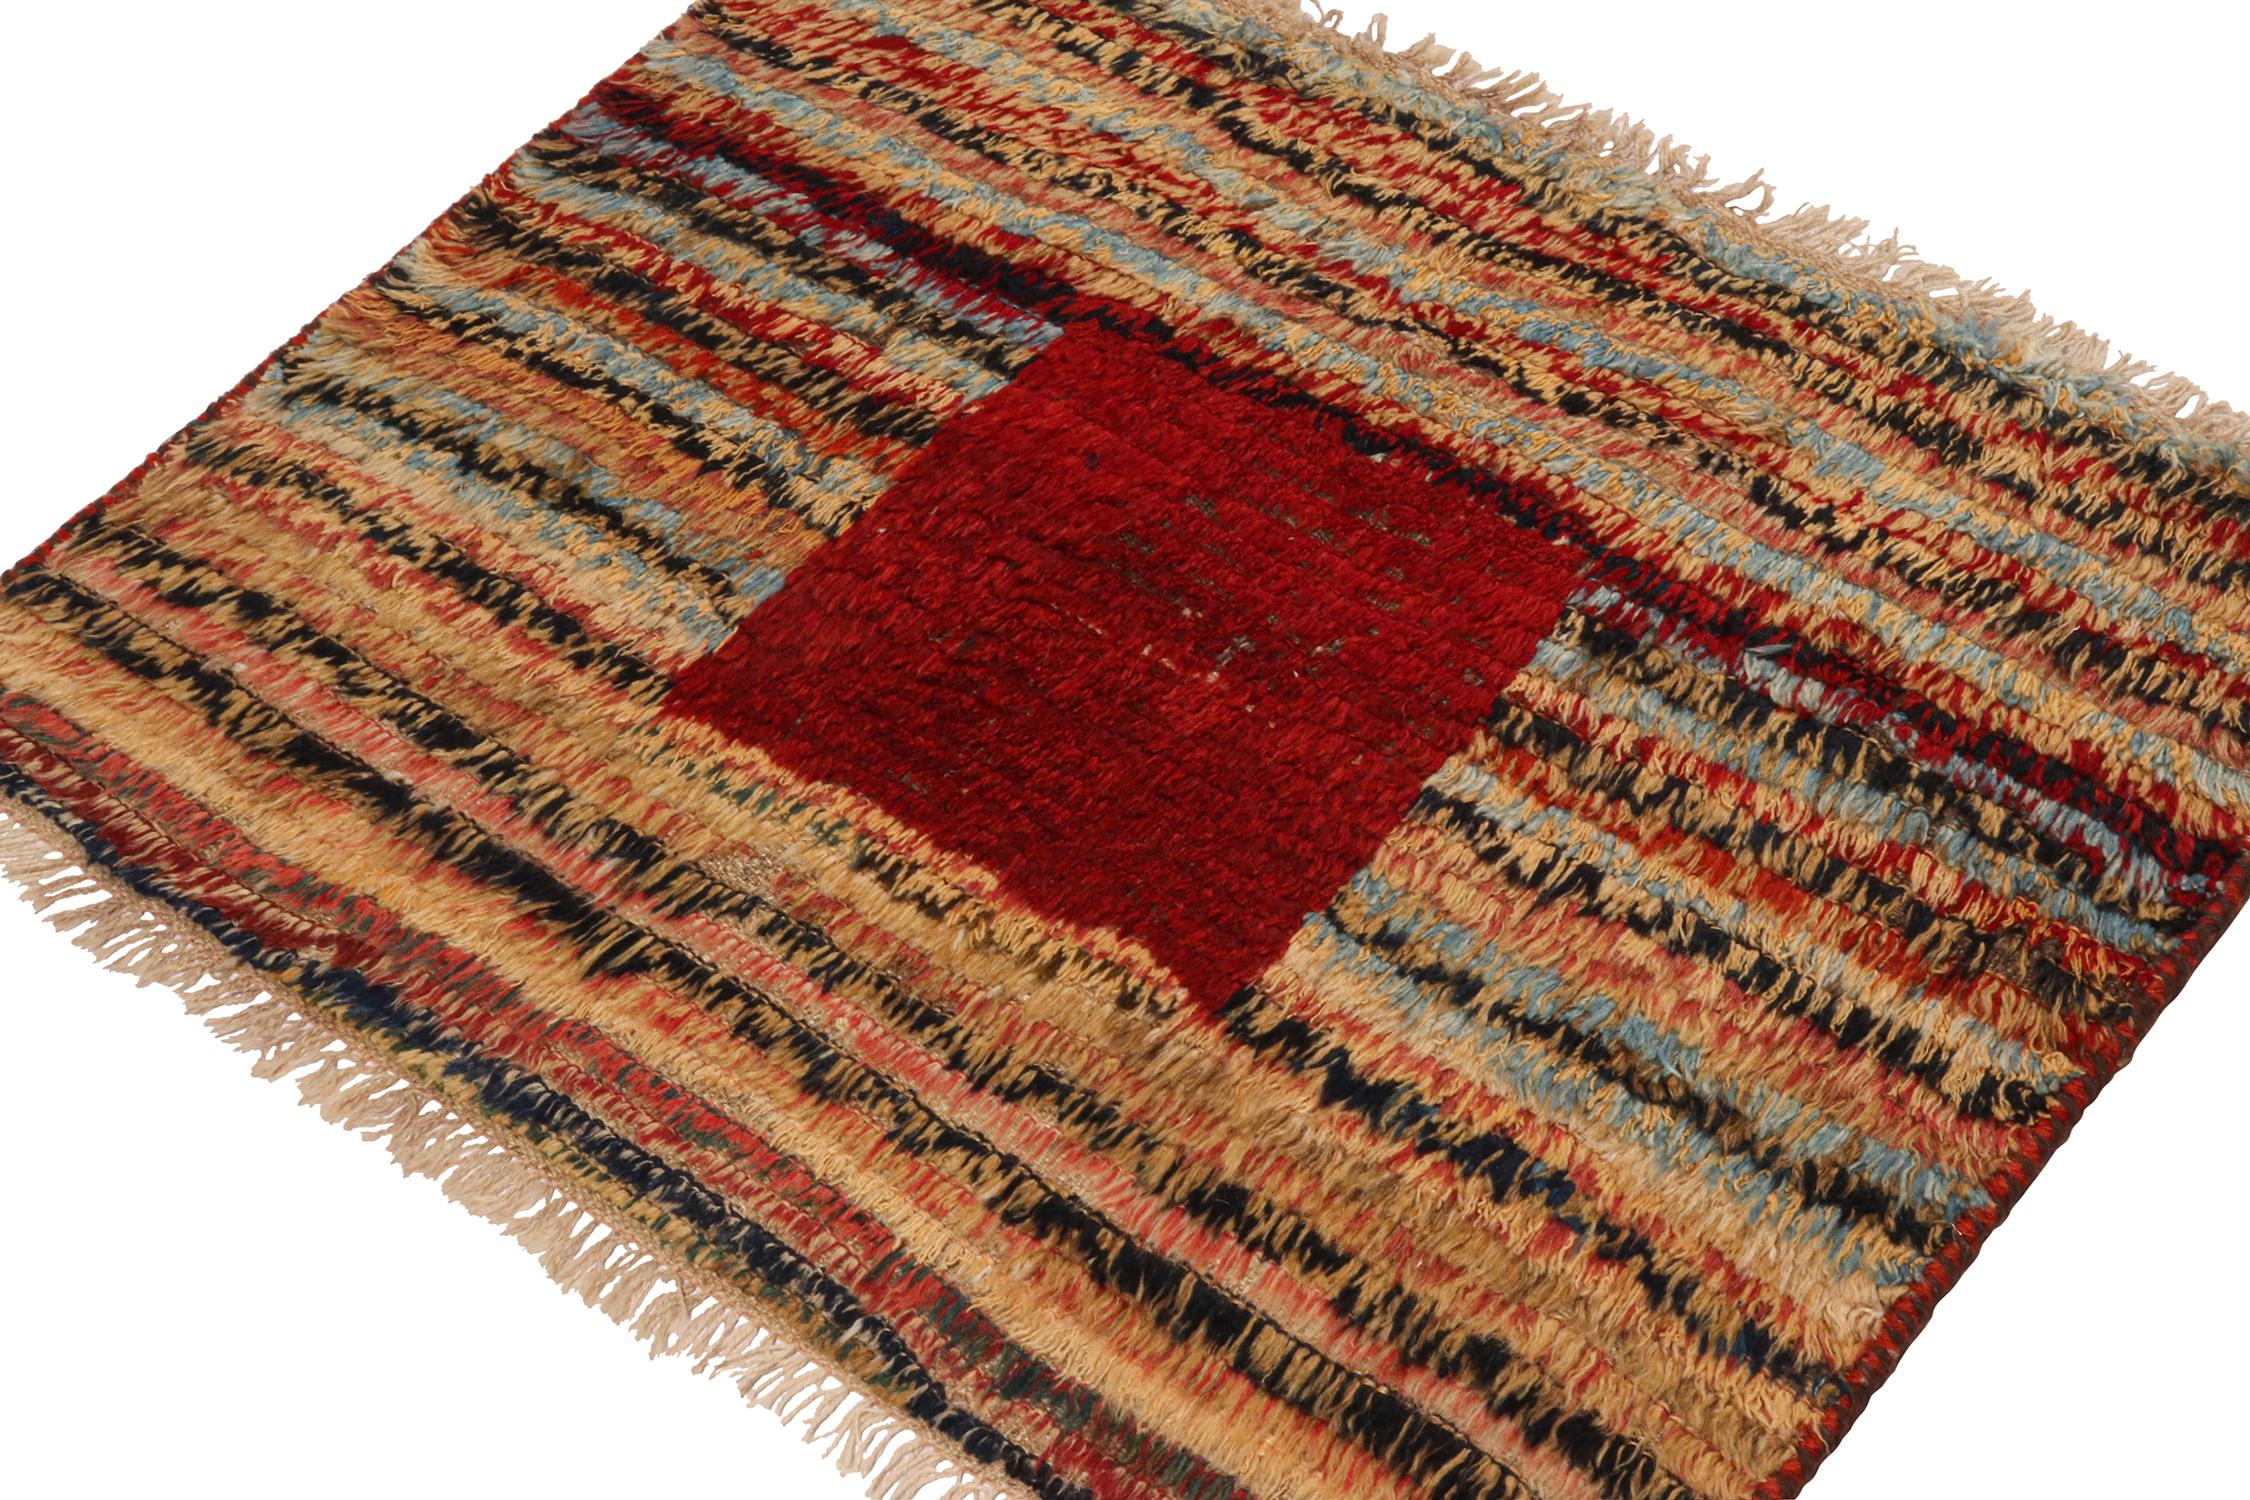 A vintage 3x3 Persian Gabbeh rug, making a grand entry to Rug & Kilim’s curation of rare tribal pieces. Hand-knotted in wool, originating circa 1950-1960.

On the Design:

This piece features a lively play of polychromatic stripes, which sits